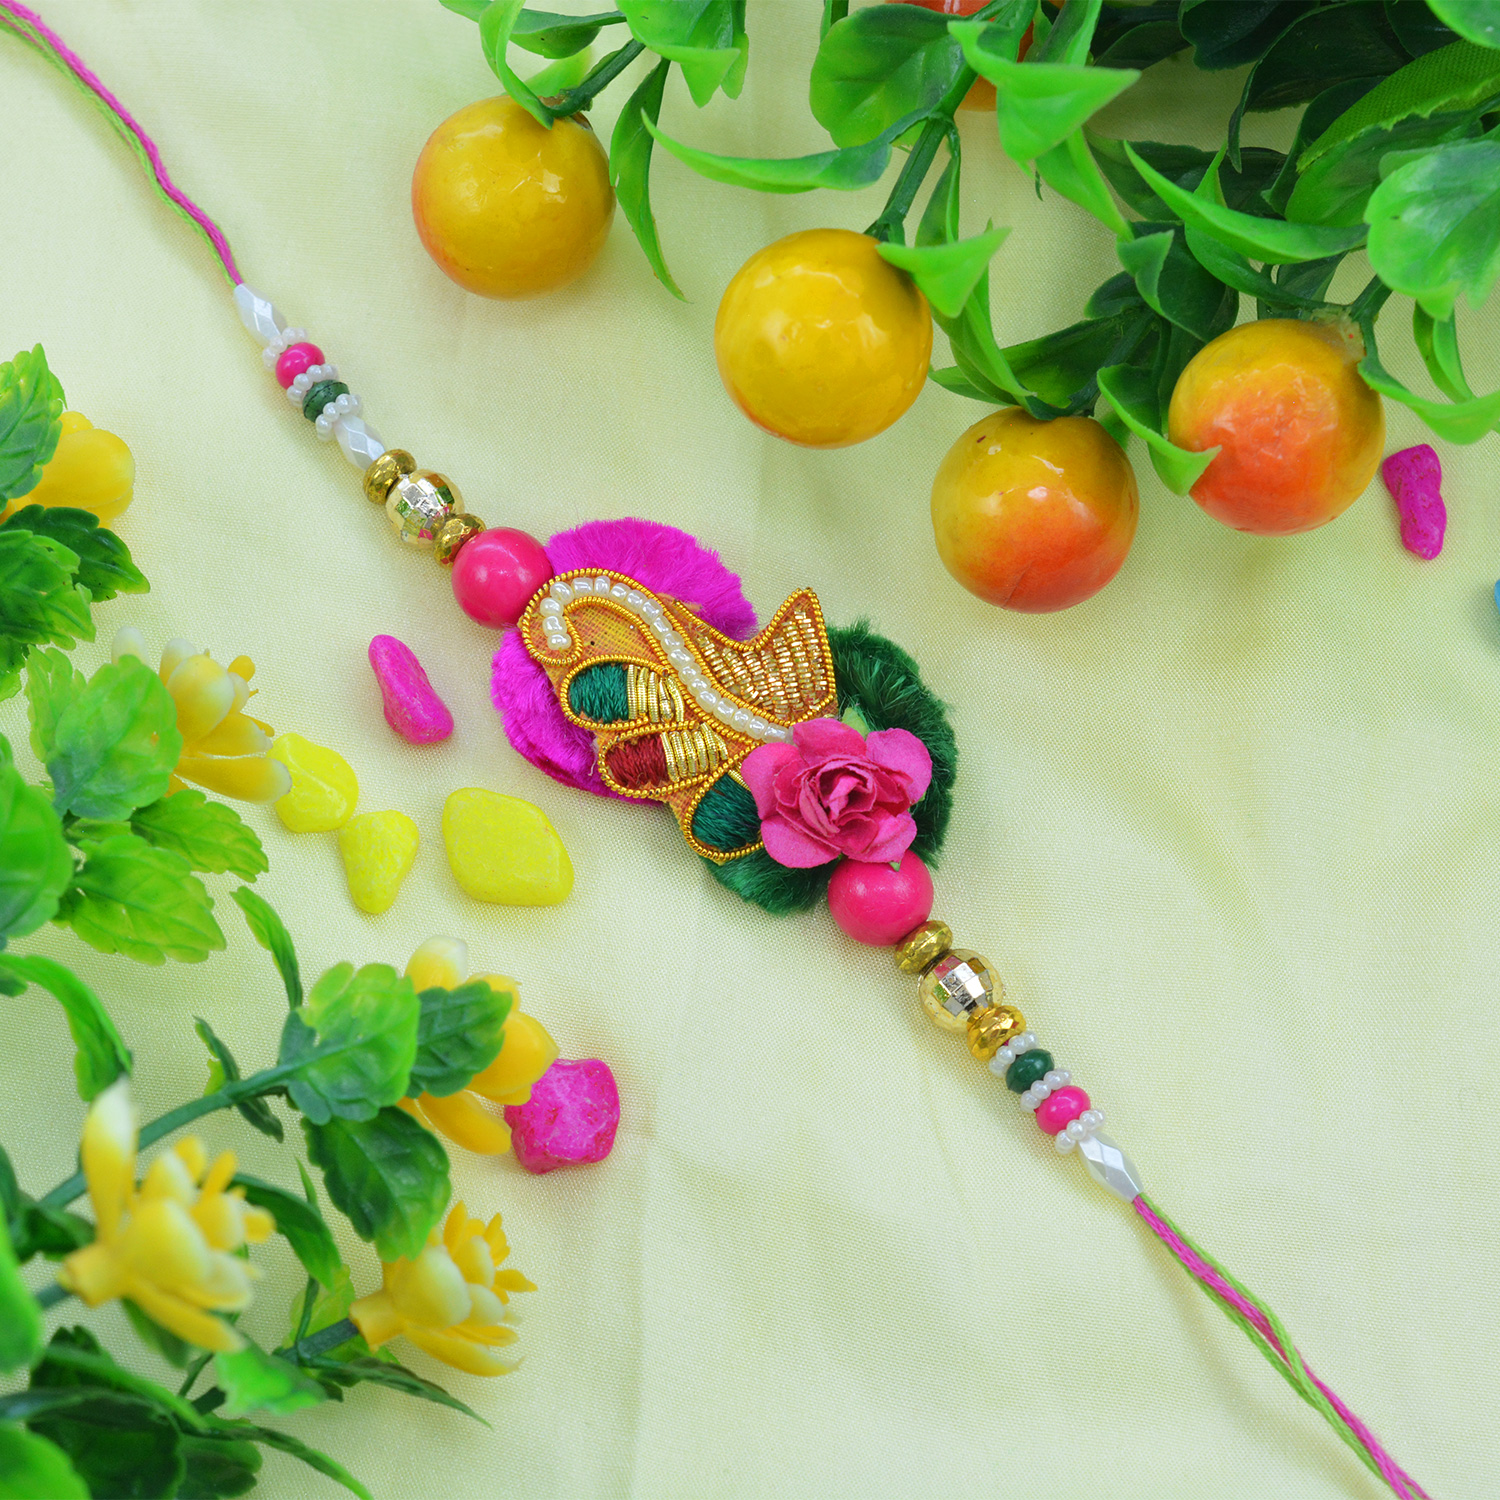 Amazing Flower and Colorful Pearls with Rich Looking Zardozi Rakhi